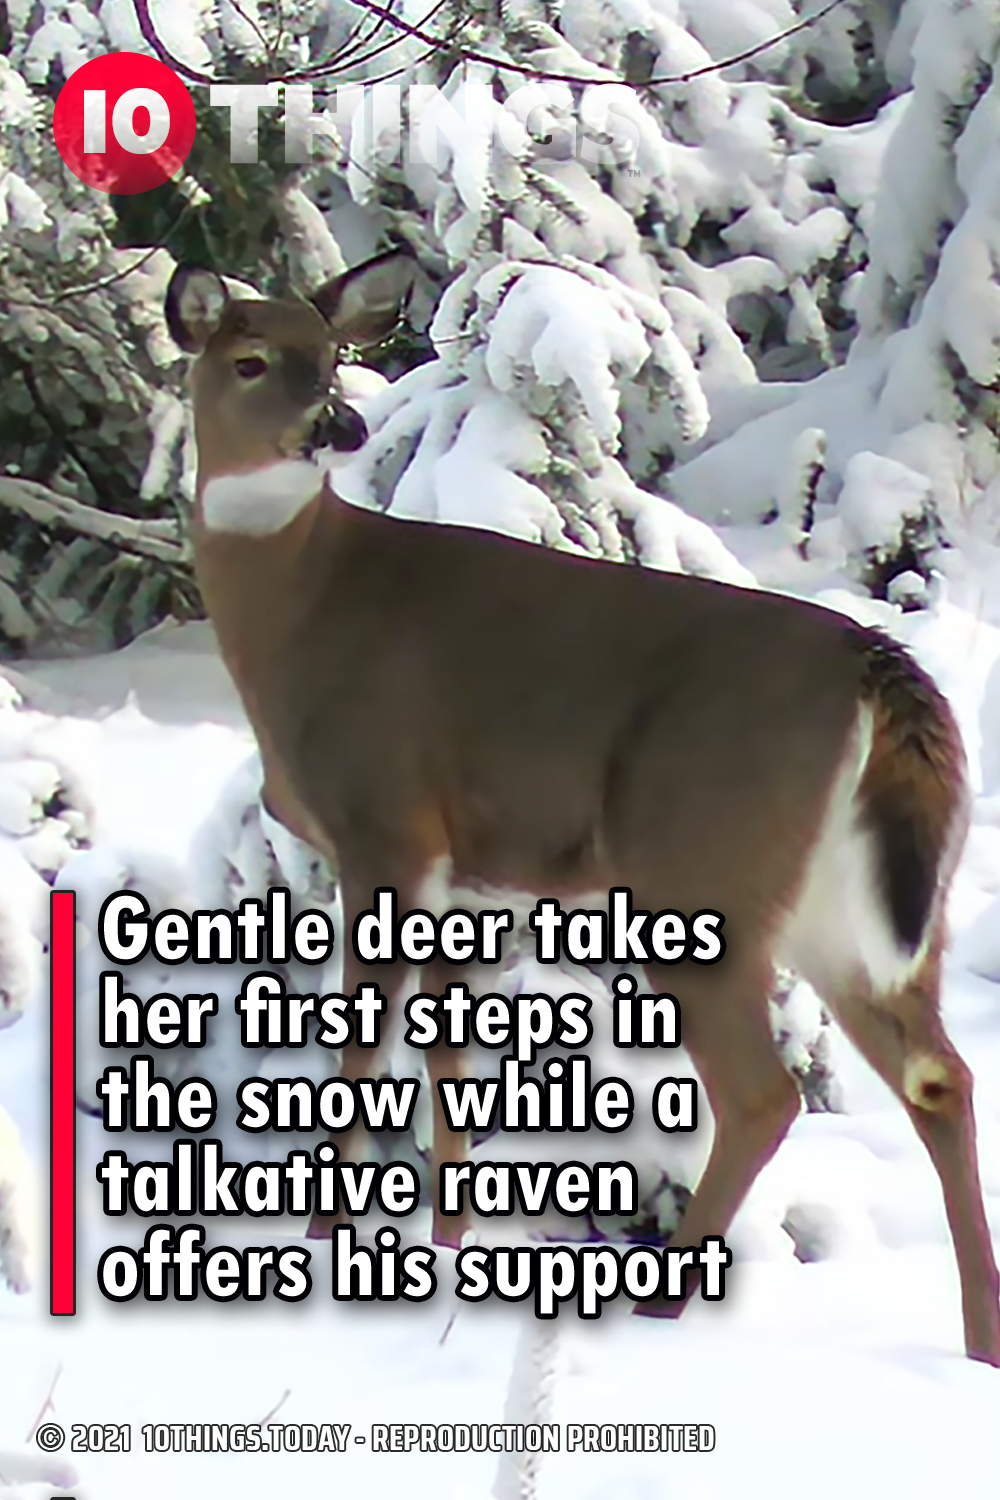 Gentle deer takes her first steps in the snow while a talkative raven offers his support